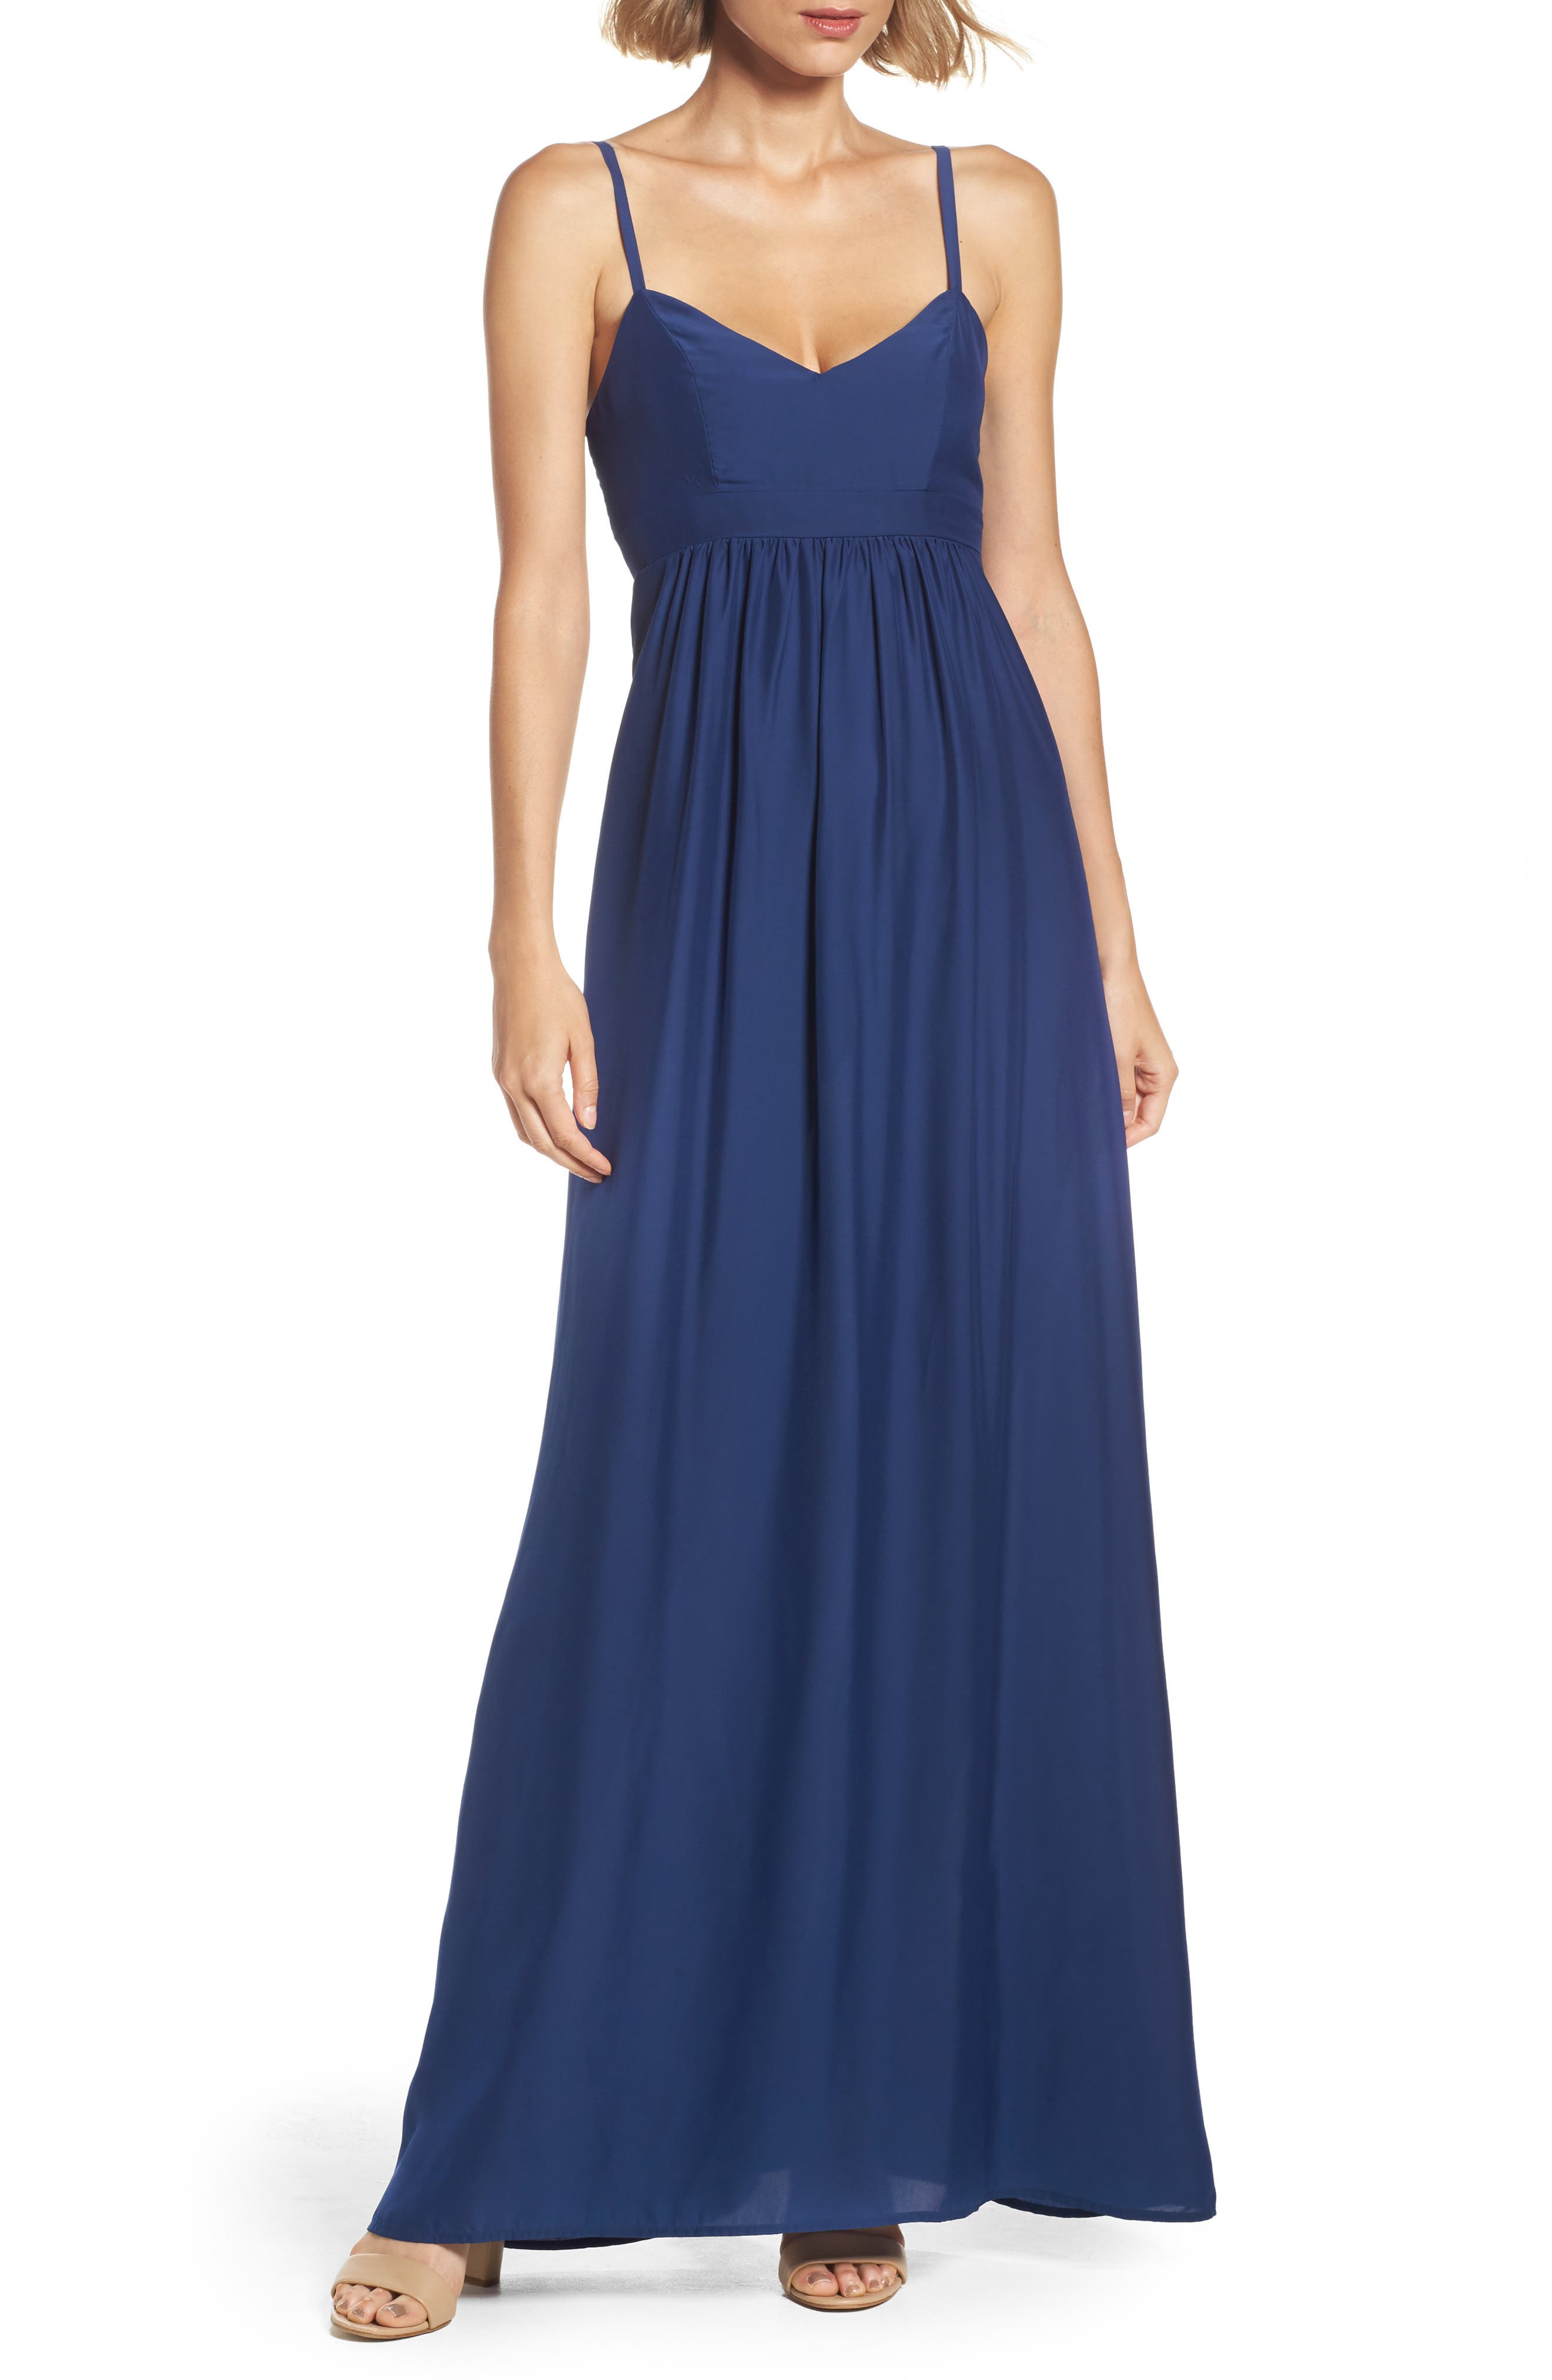 Felicity And Coco Colby Woven Maxi Dress In Navy